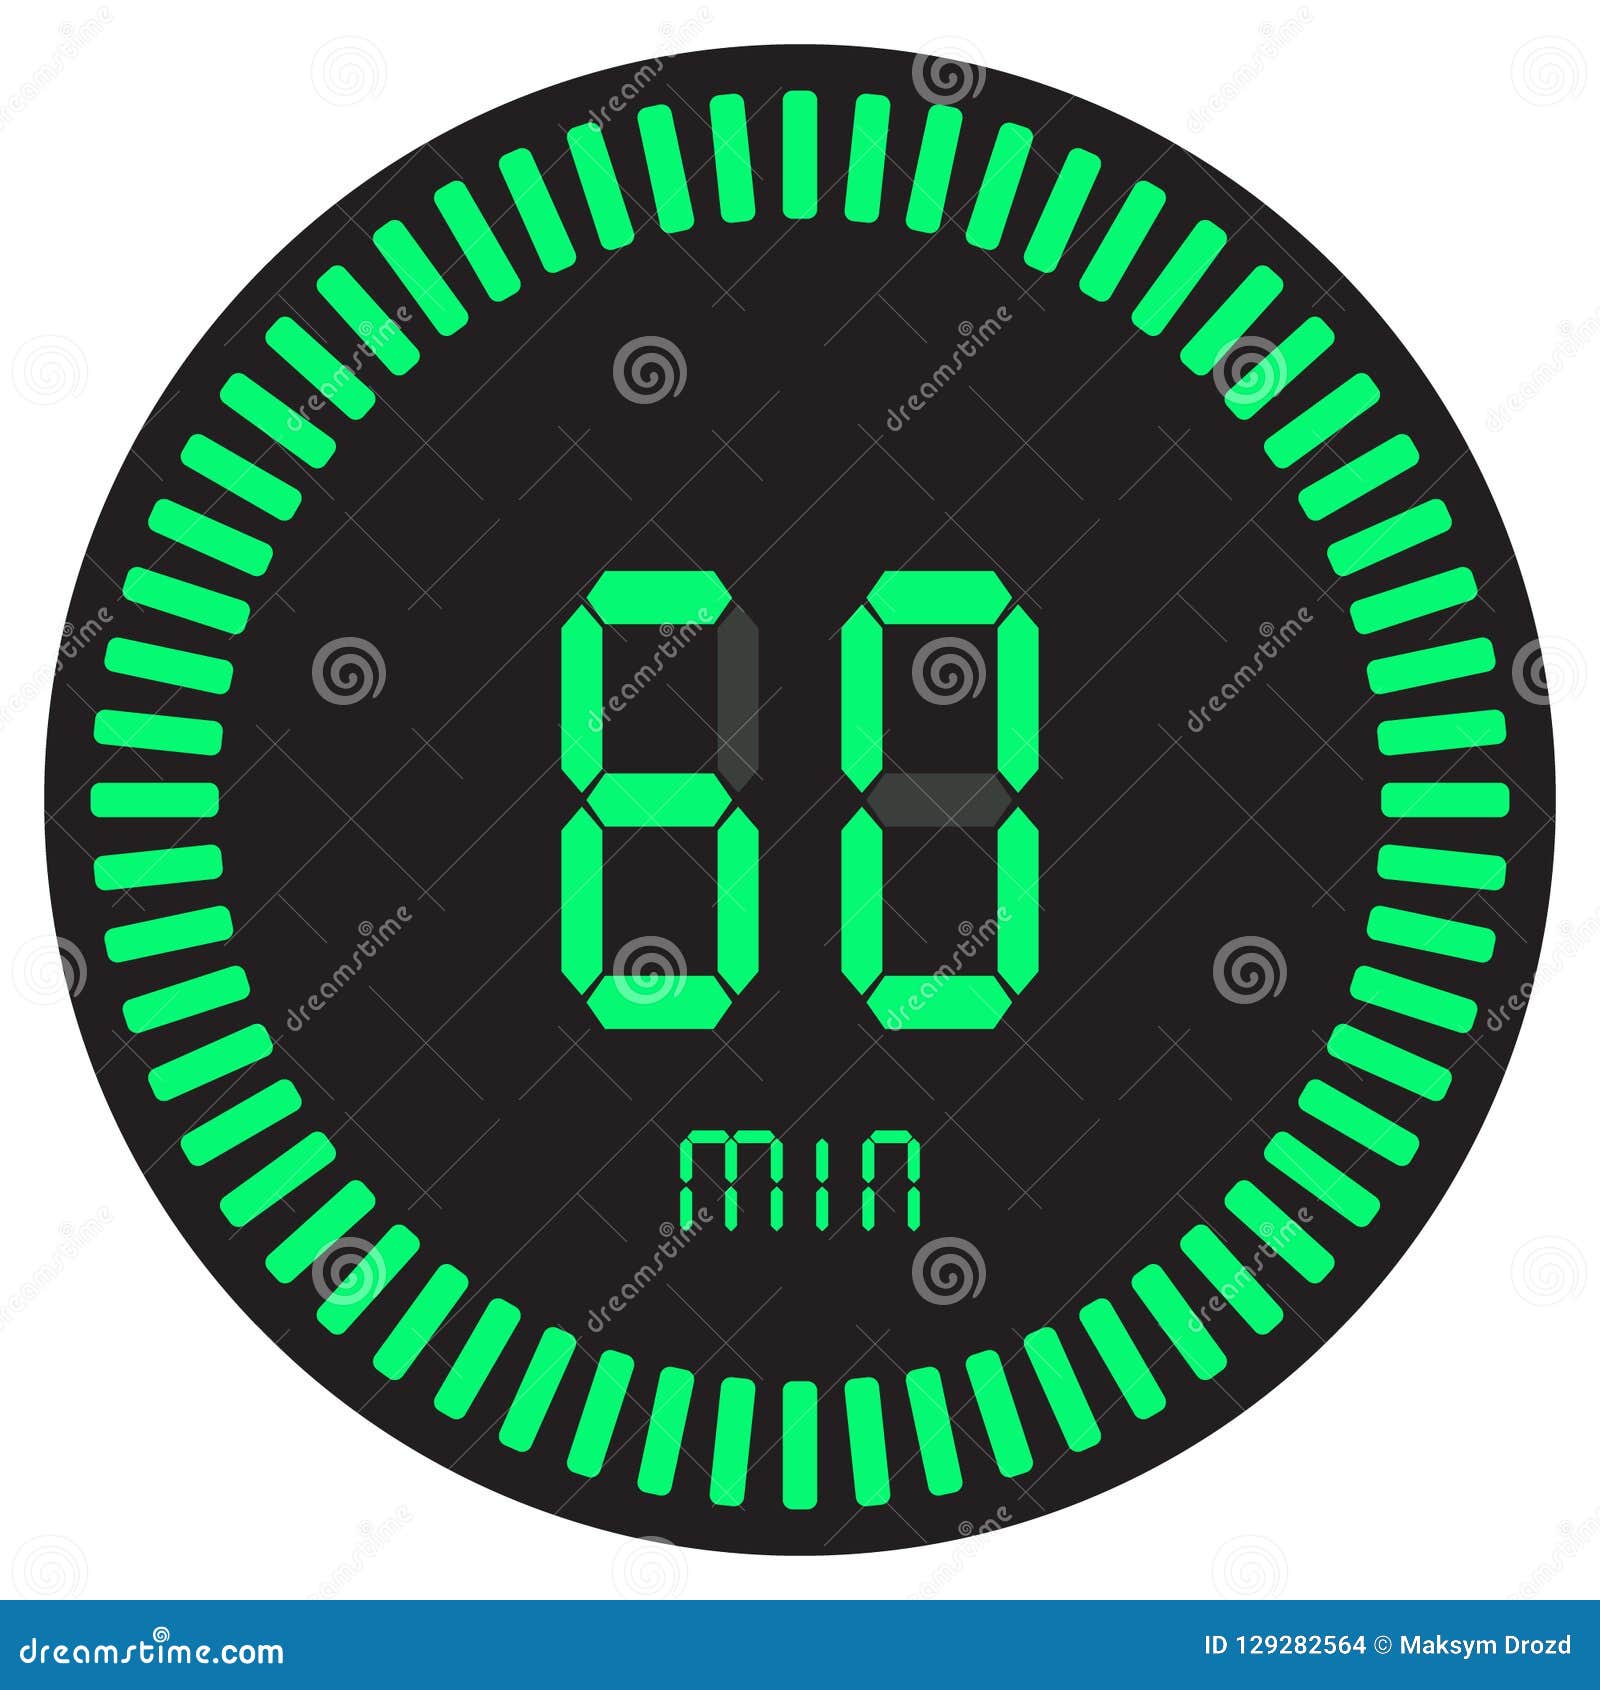 The Green Digital Timer 60 Minutes, 1 Hour. Electronic Stopwatch with a